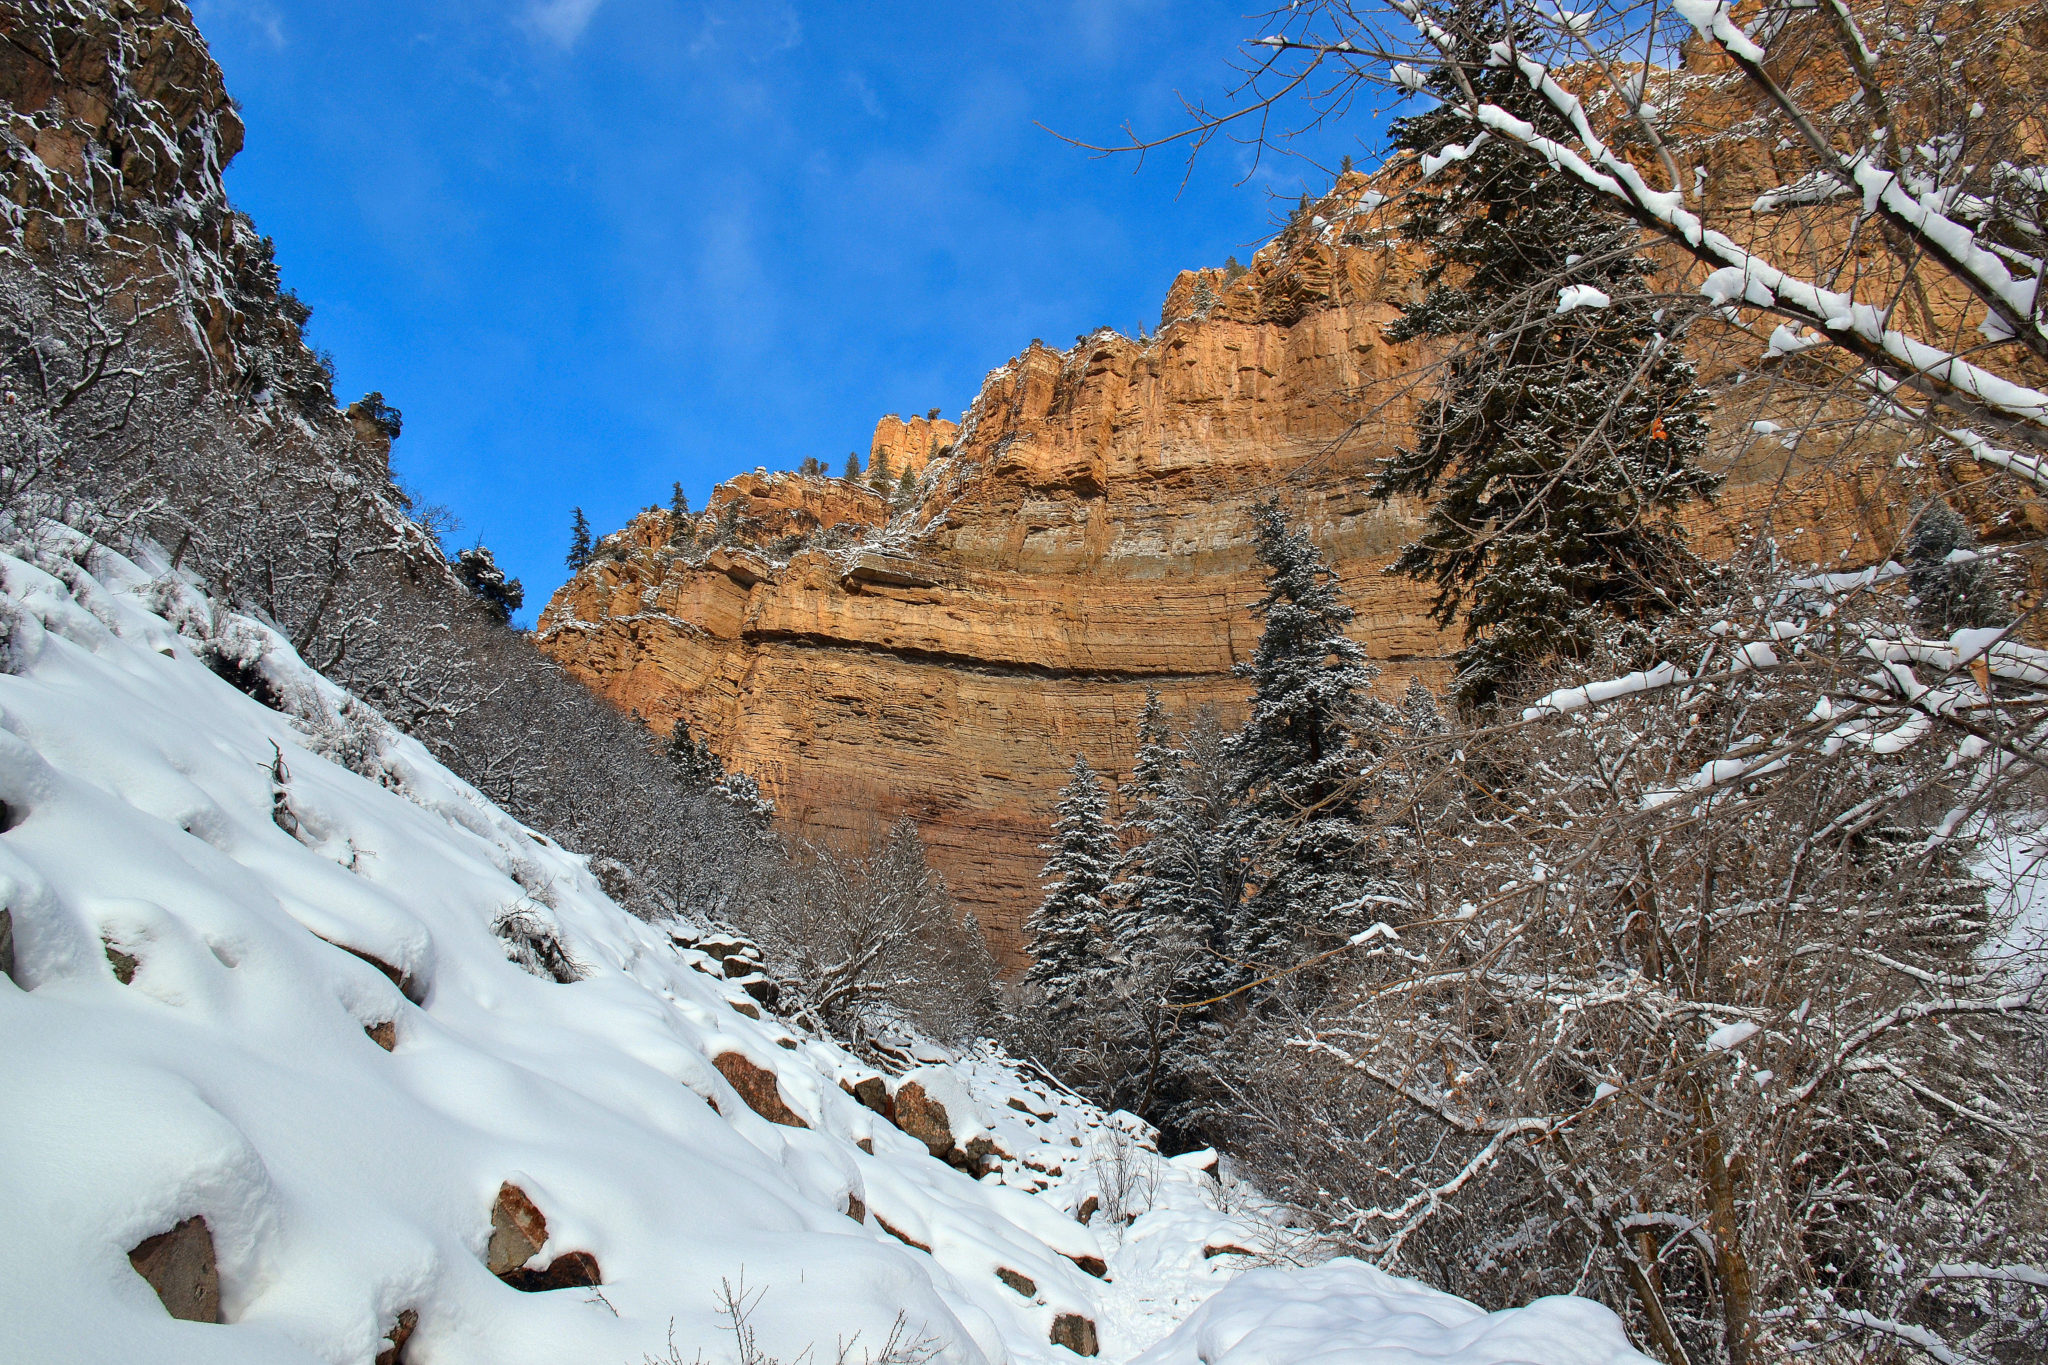 The walls of Glenwood Canyon seen from the trail